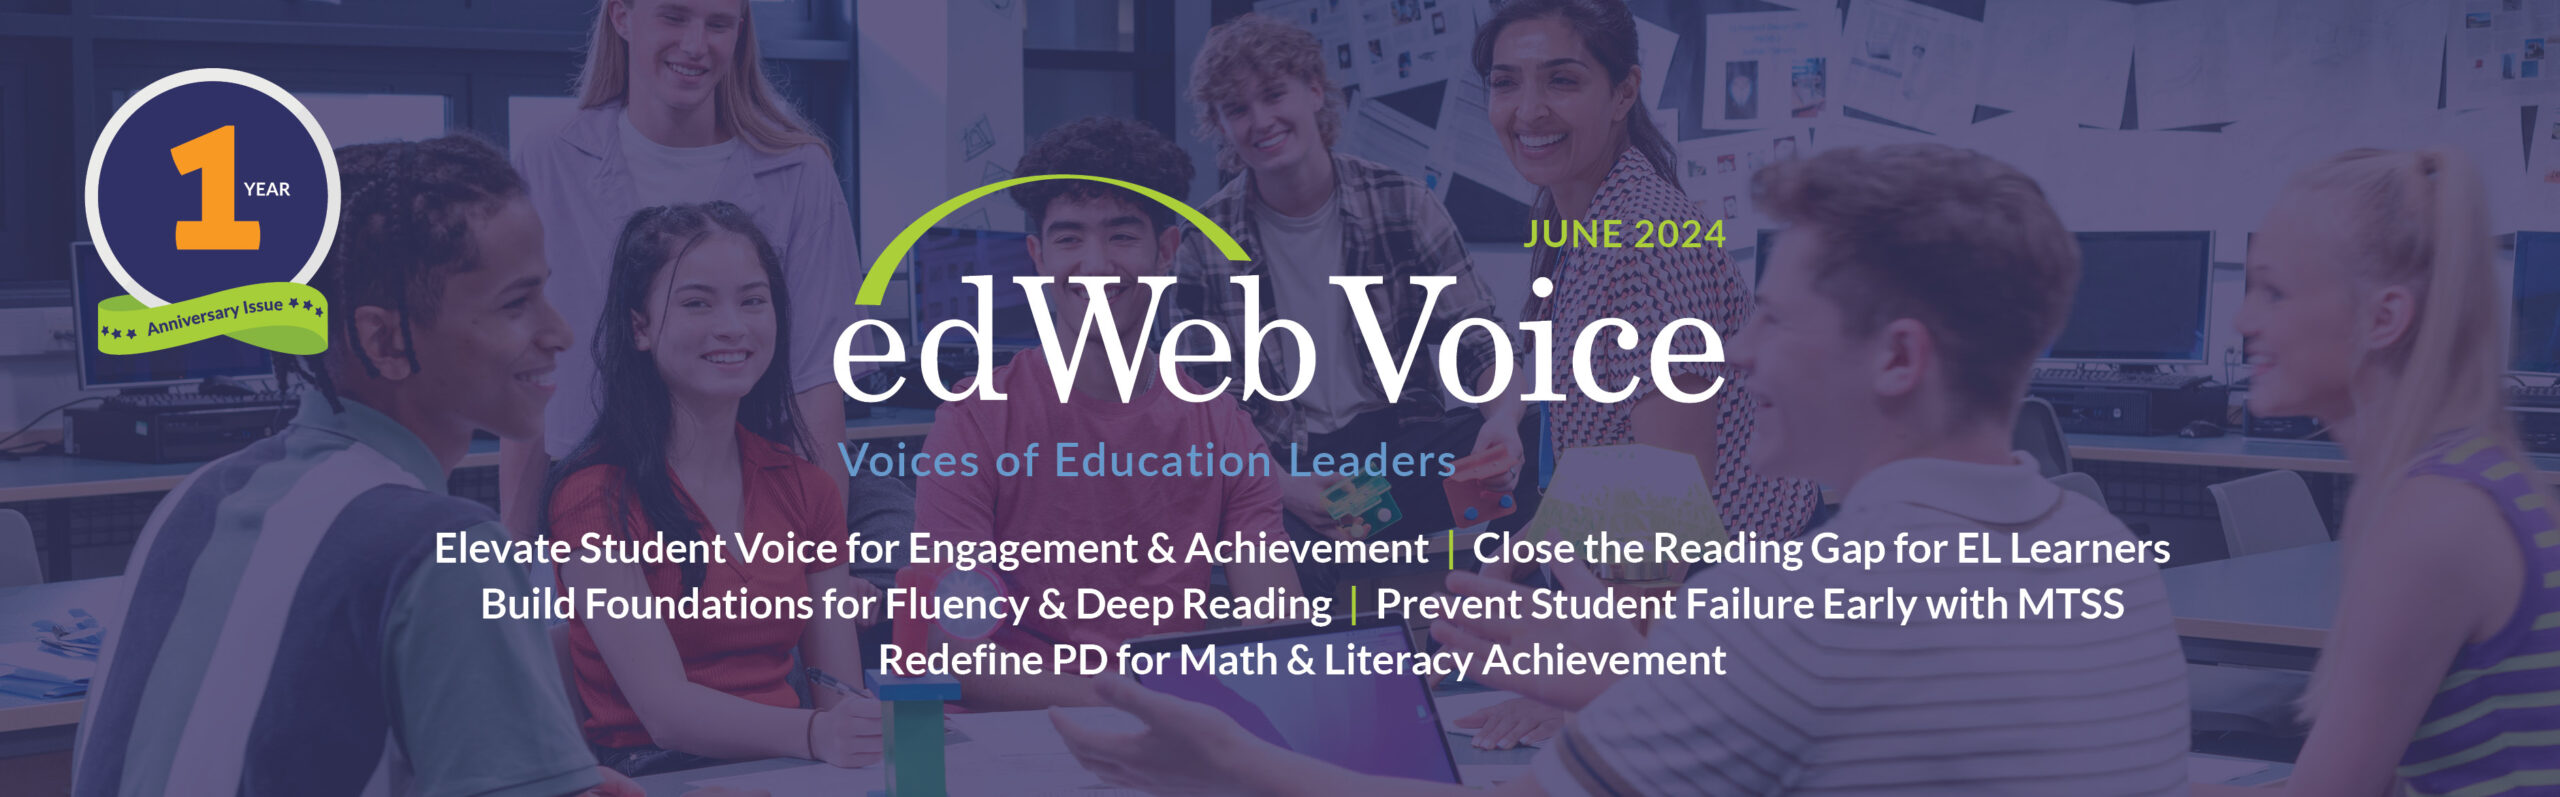 edWeb Voice Monthly Page